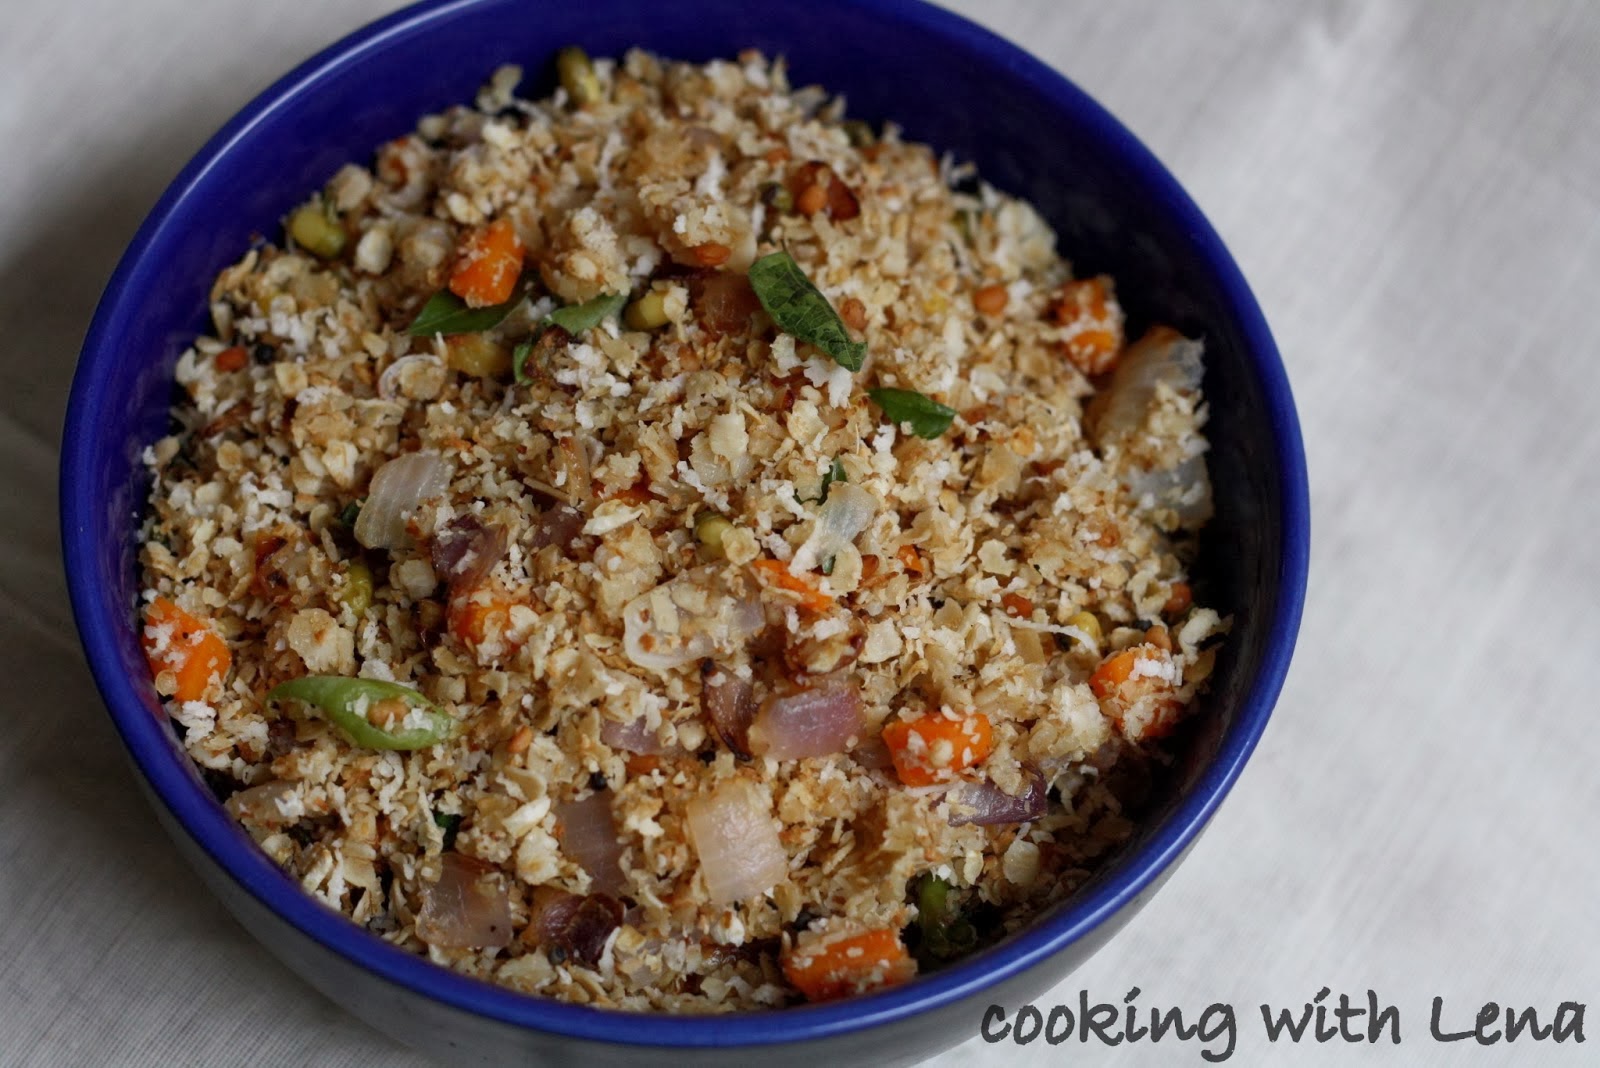 http://cookingwithlena.blogspot.com/2013/02/oats-upma-healthy-vegetable-and-oats.html